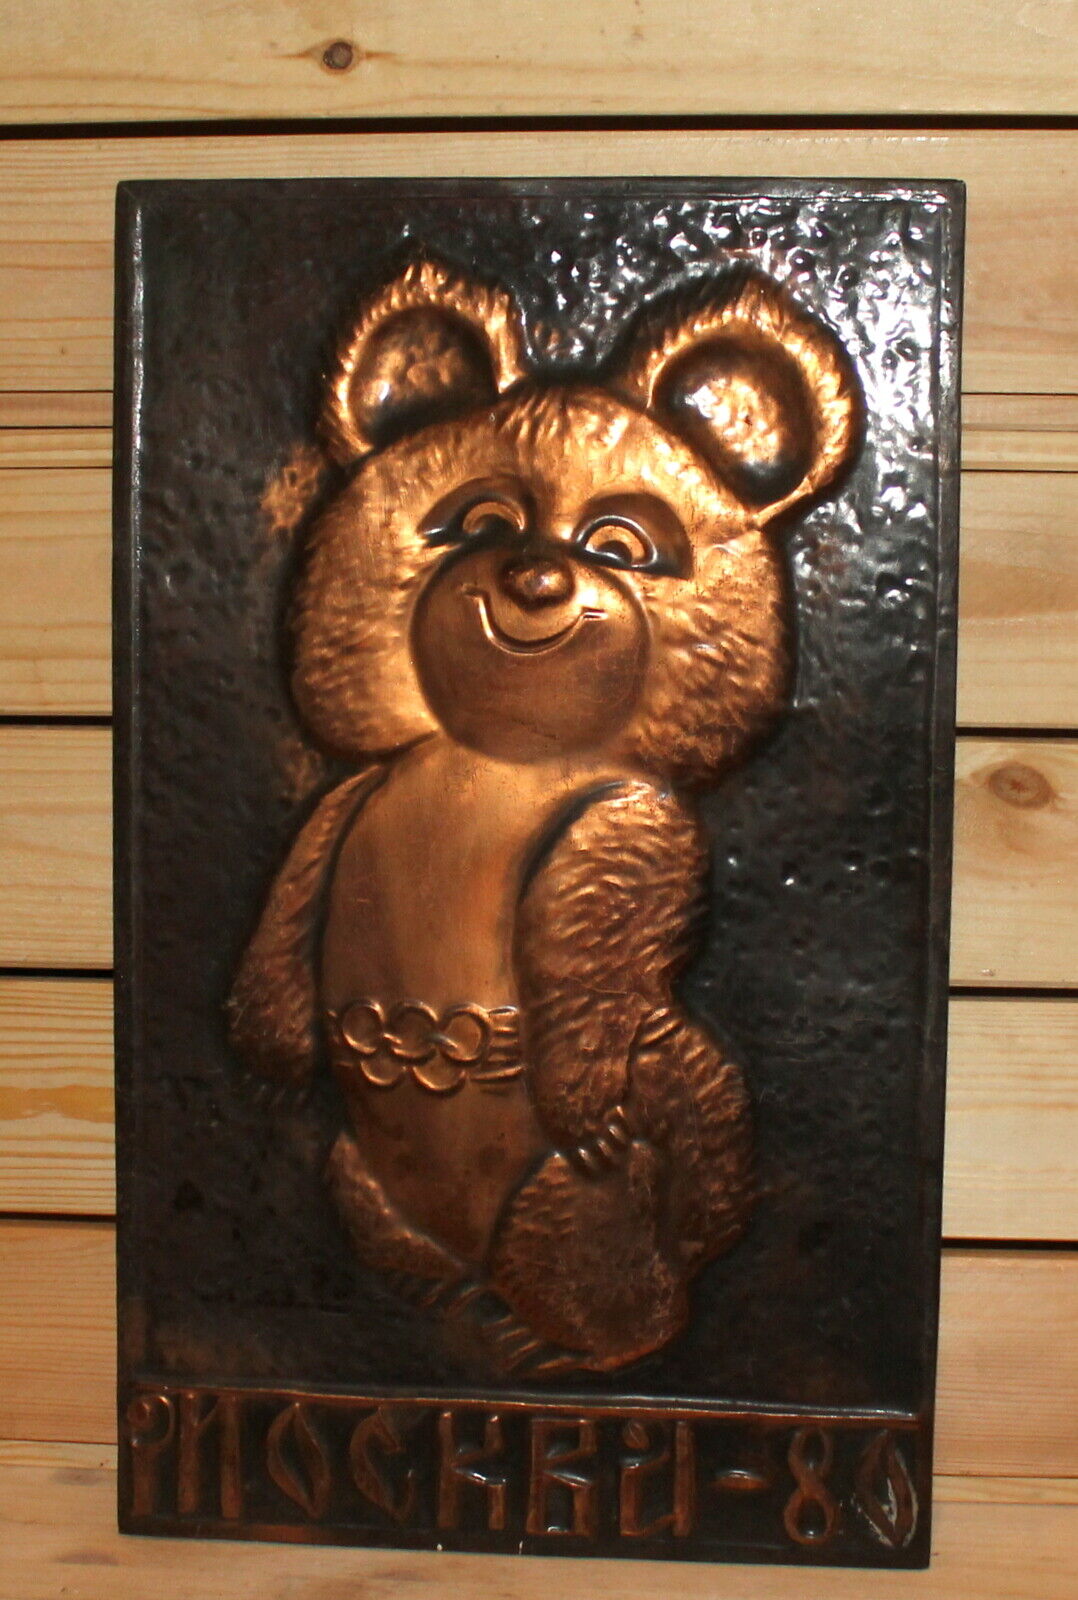 1980 Russian Moscow Olympic games misha bear mascot copper wall hanging plaque